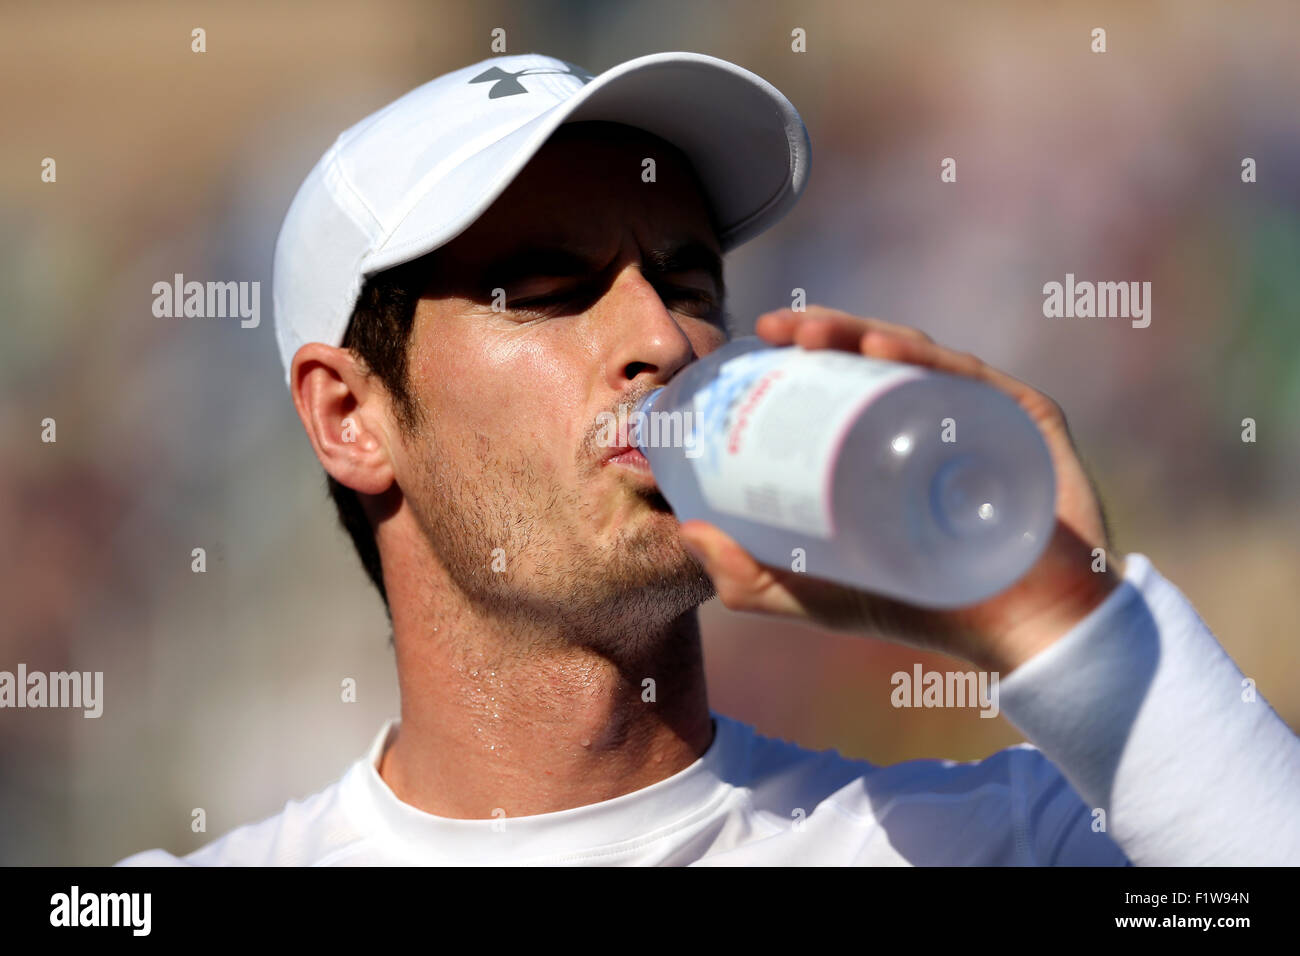 New York, USA. 7th September, 2015. Andy Murray of Great Britain during his 4th round match against Kevin Anderson of South Africa at the U.S. Open in Flushing Meadows, New York on September 7th, 2015.   Anderson won the match in four sets. Credit:  Adam Stoltman/Alamy Live News Stock Photo